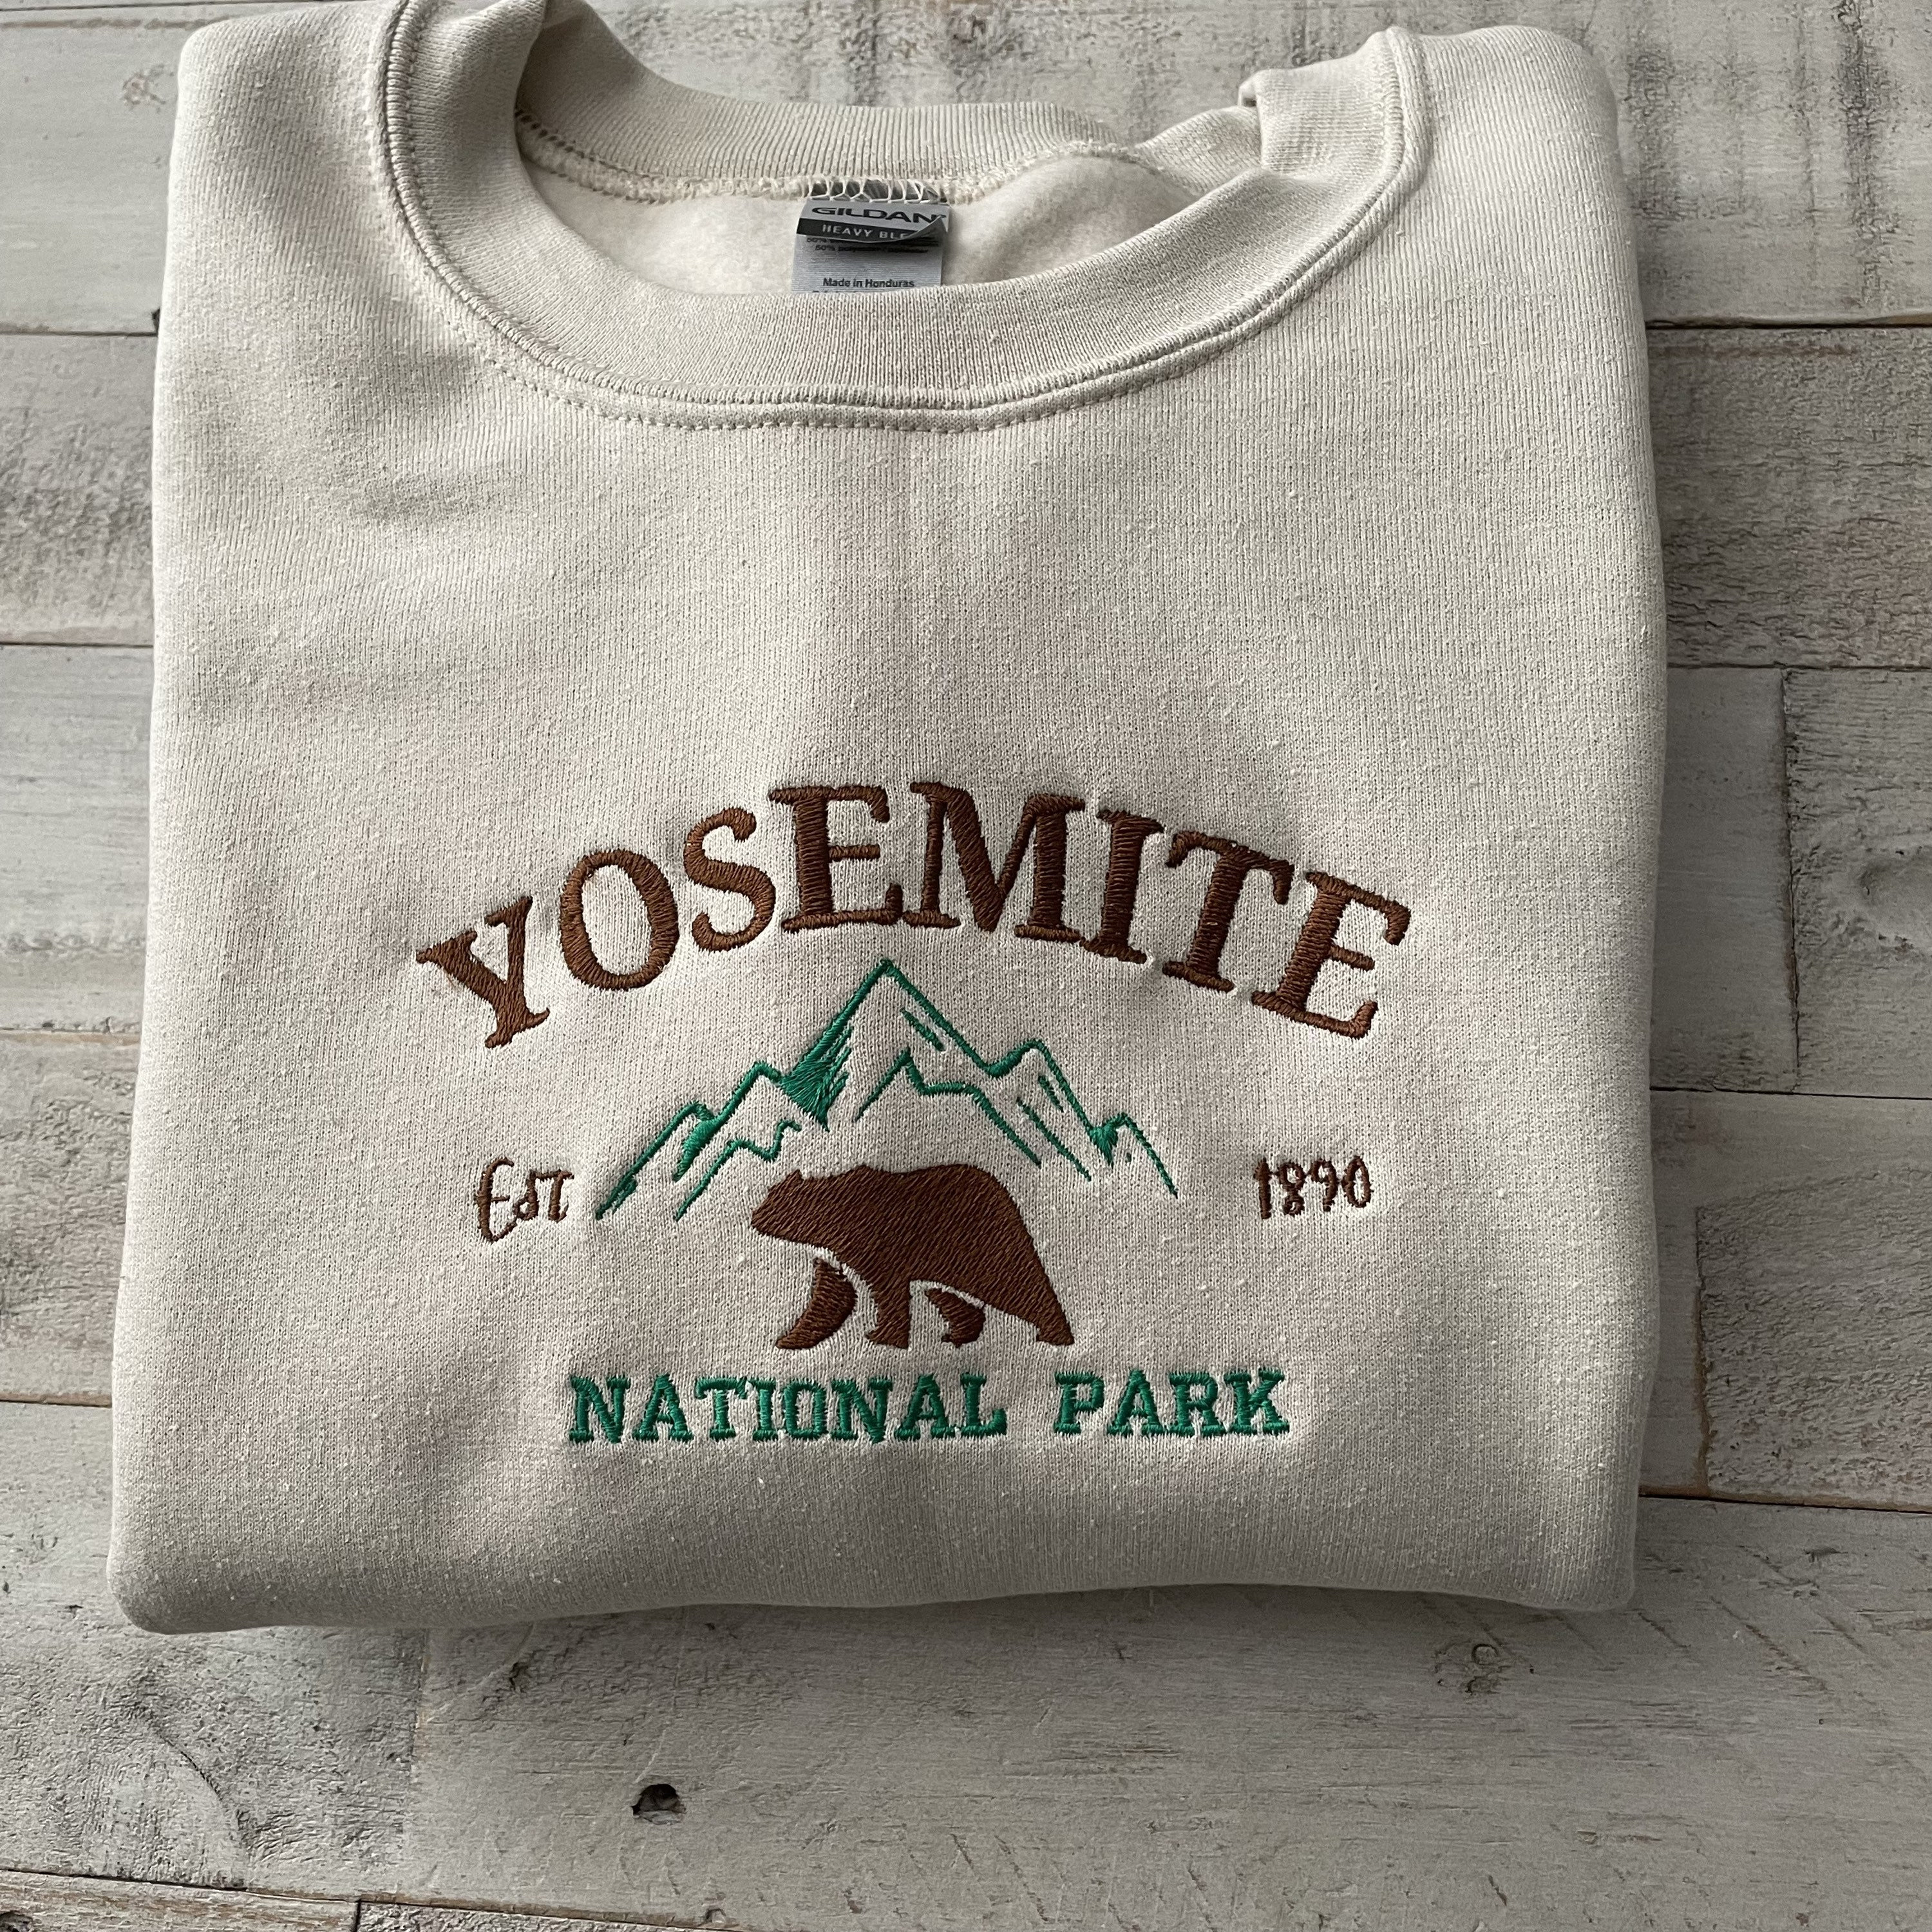 Discover Yosemite National Park Embroidered Crewneck-embroidered Crewneck-National Park Sweatshirt